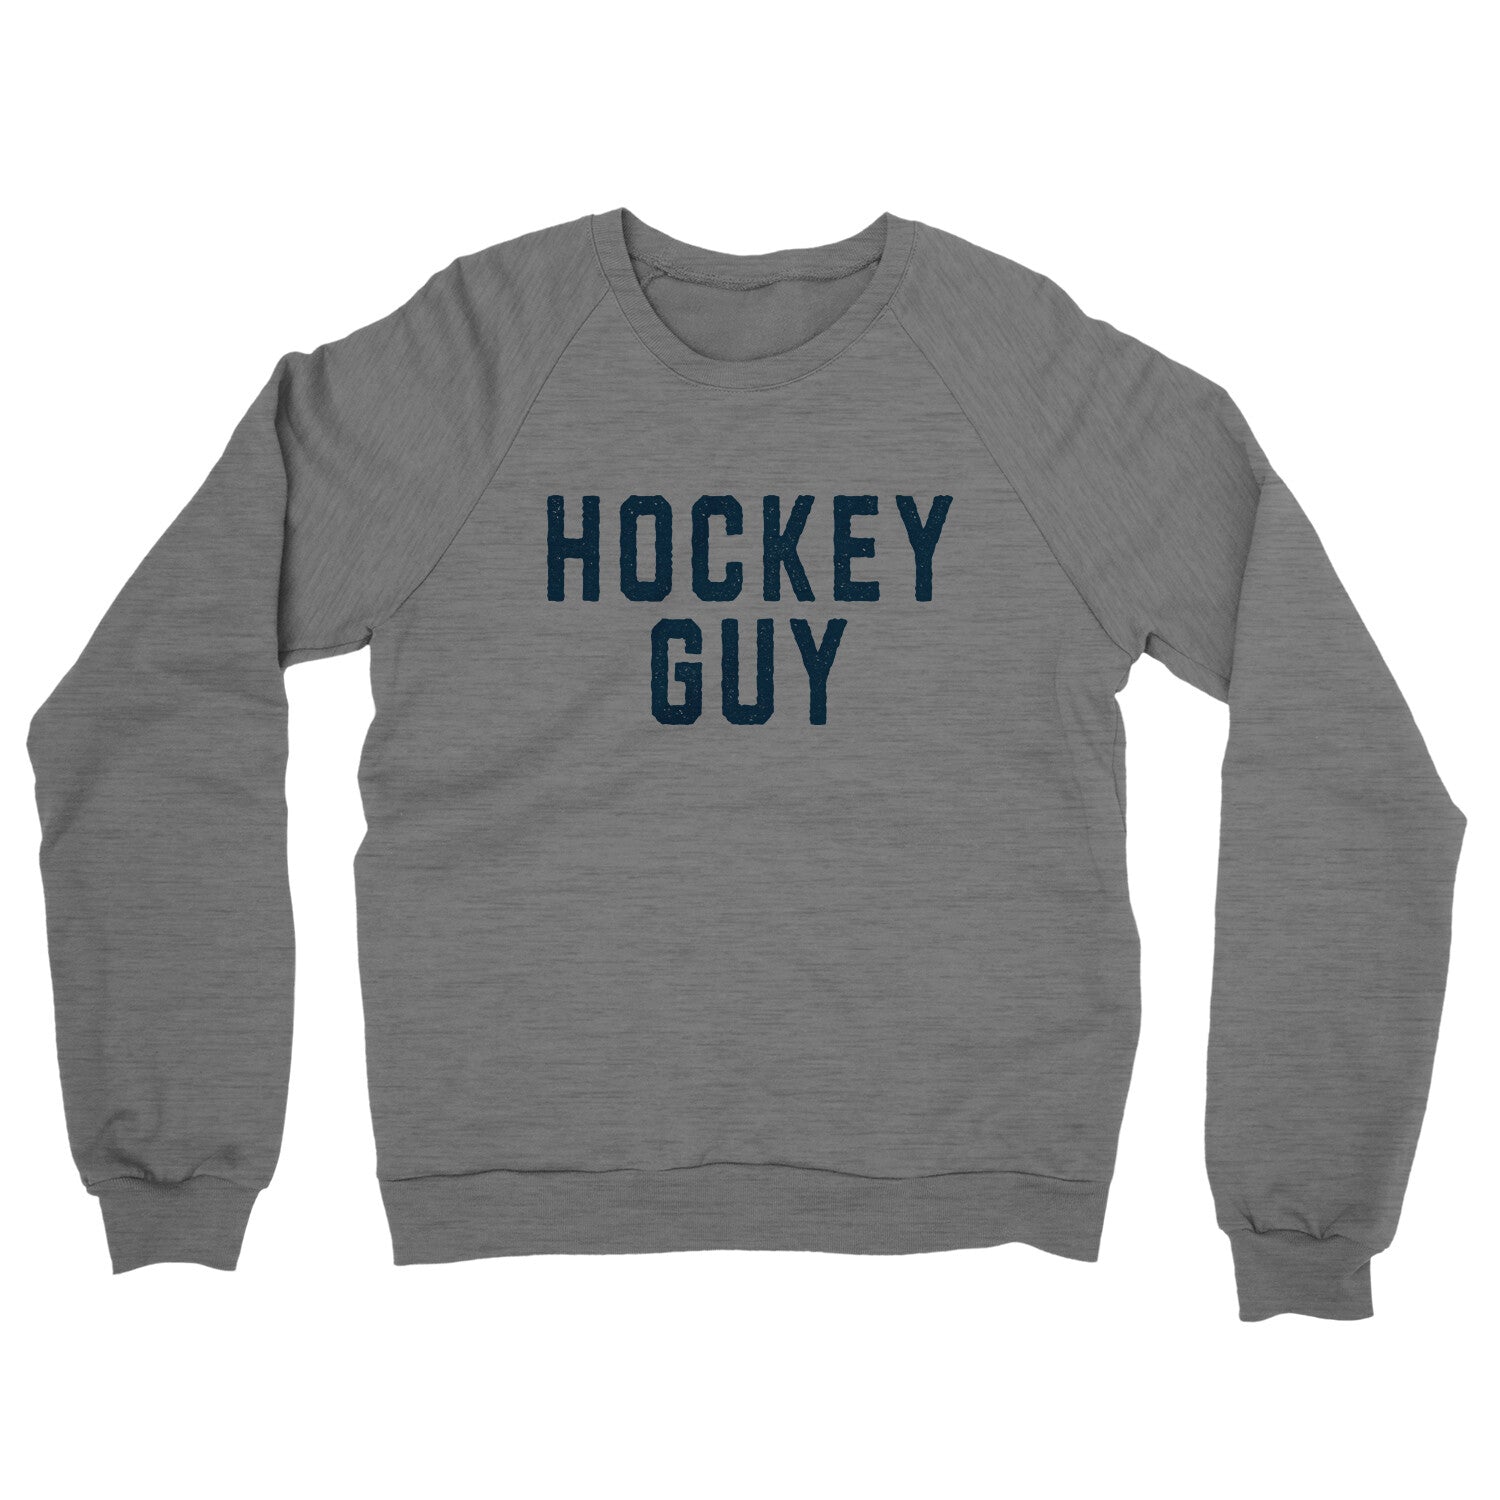 Hockey Guy in Graphite Heather Color